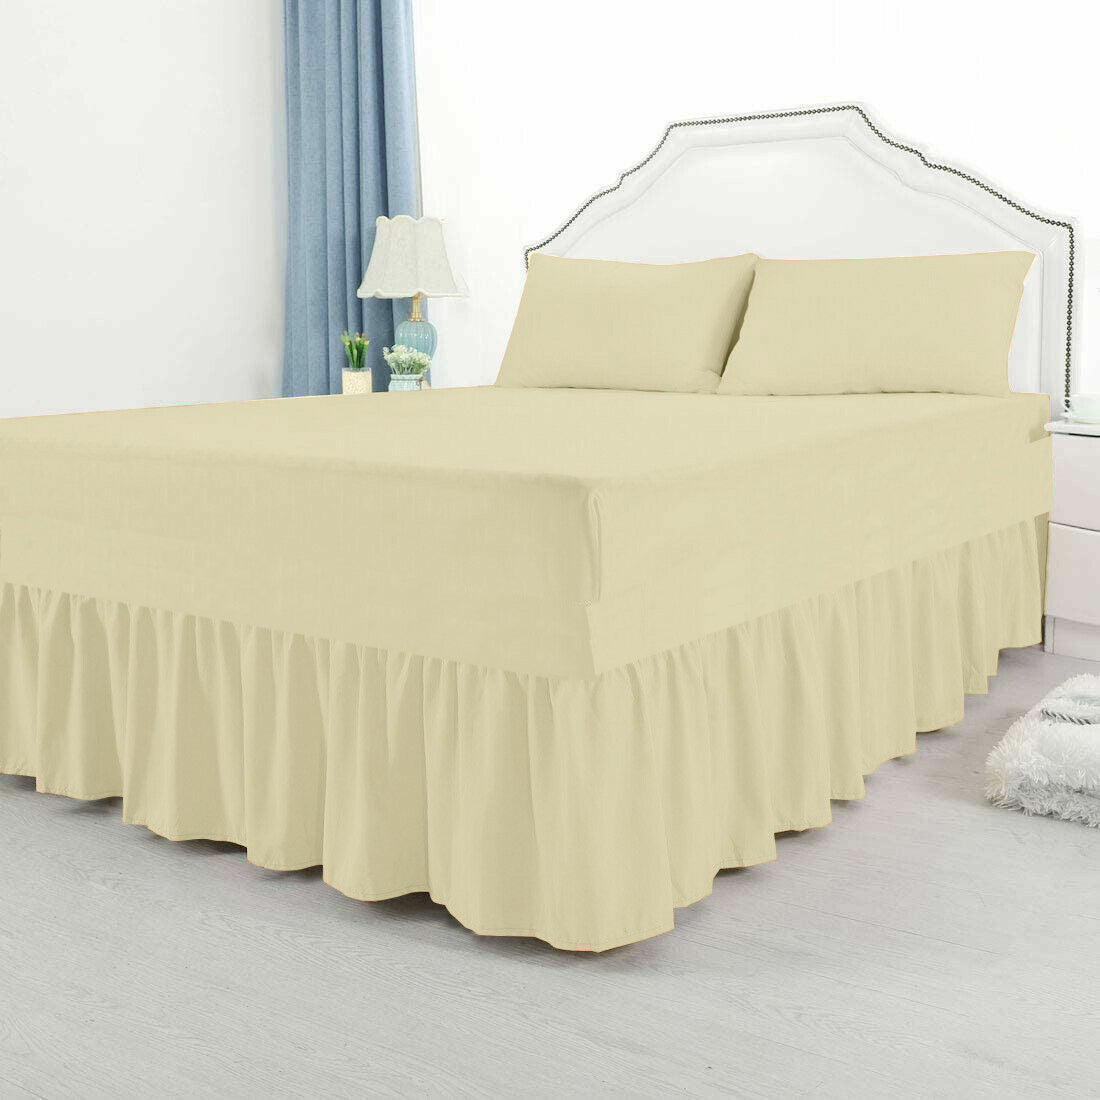 Special Sizes Extra Deep Fire Retardant Fitted Valance Sheet King S. King Size frill 6" to 18" Polycotton Bed Sheets ⭐⭐⭐⭐